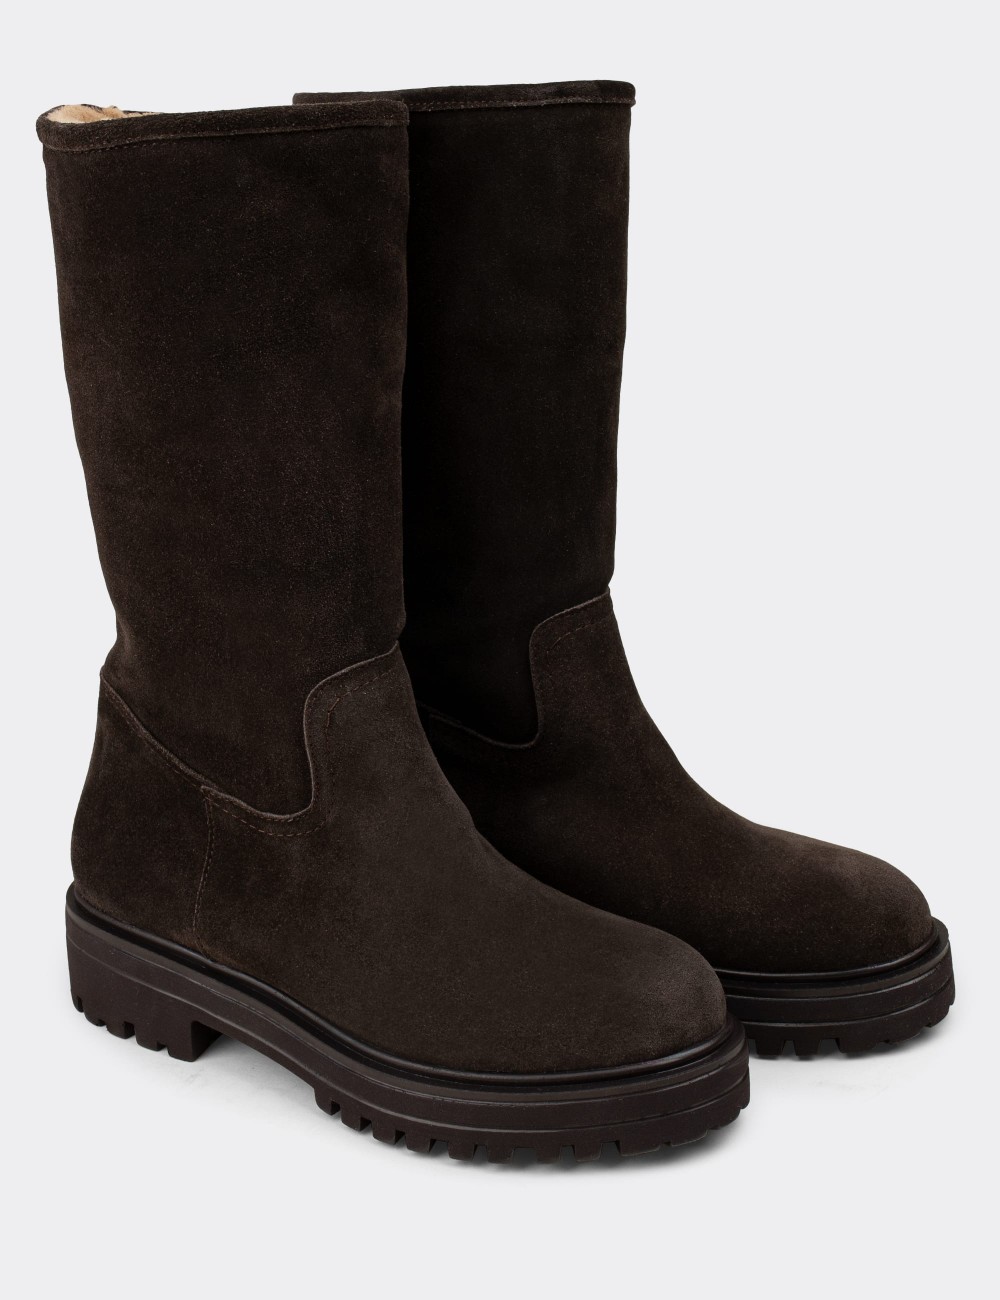 Brown Suede Leather Boots - Deery